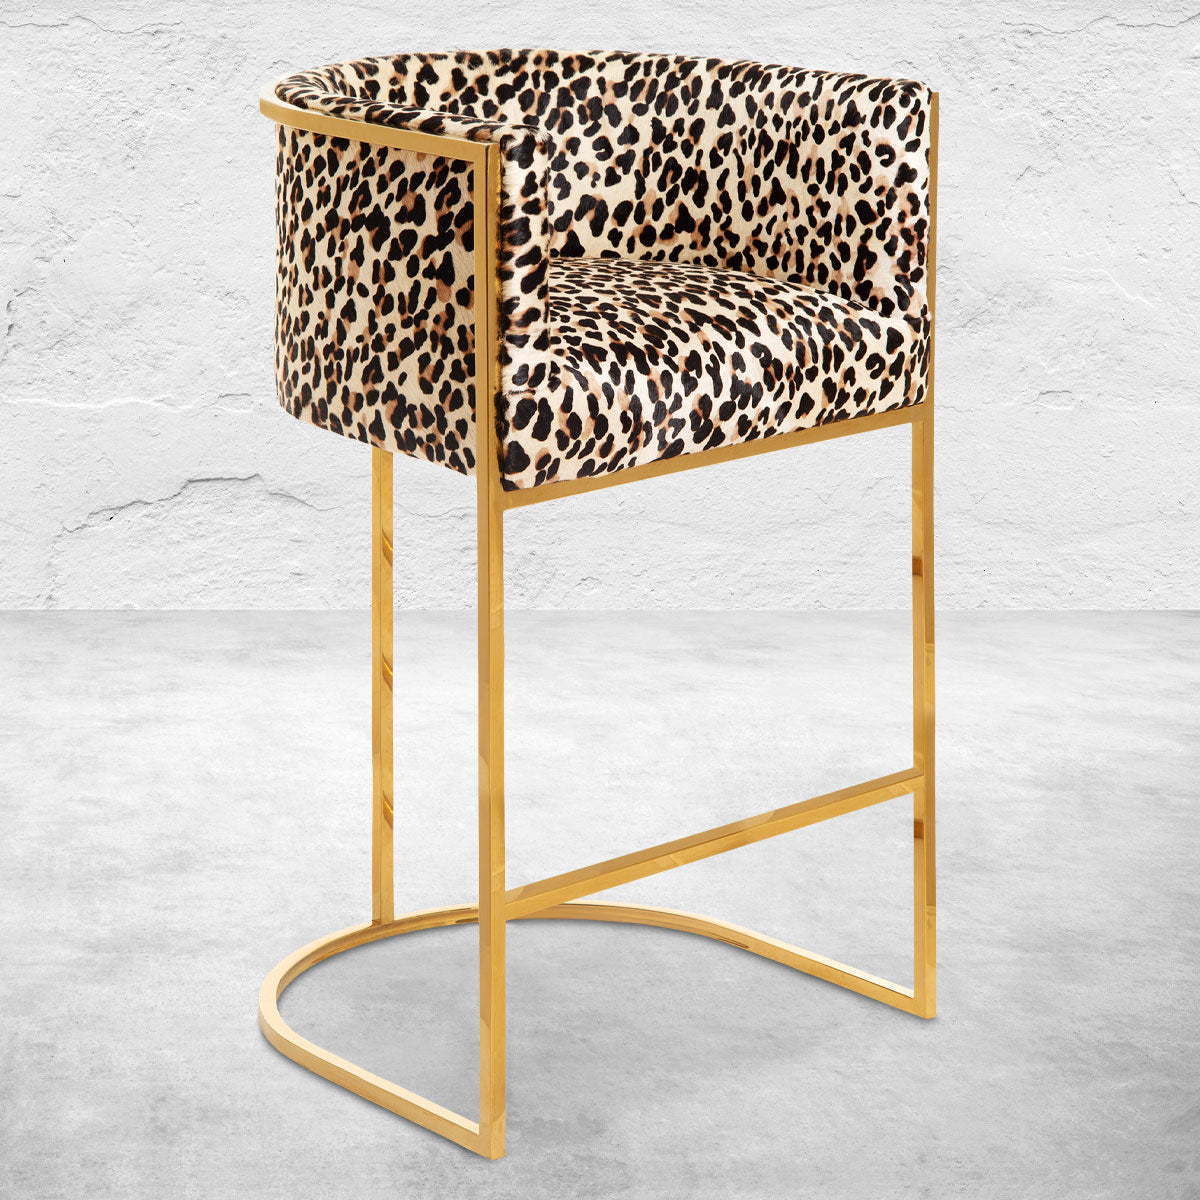 Lisbon Bar and Counter Stool in Leopard Print Cowhide